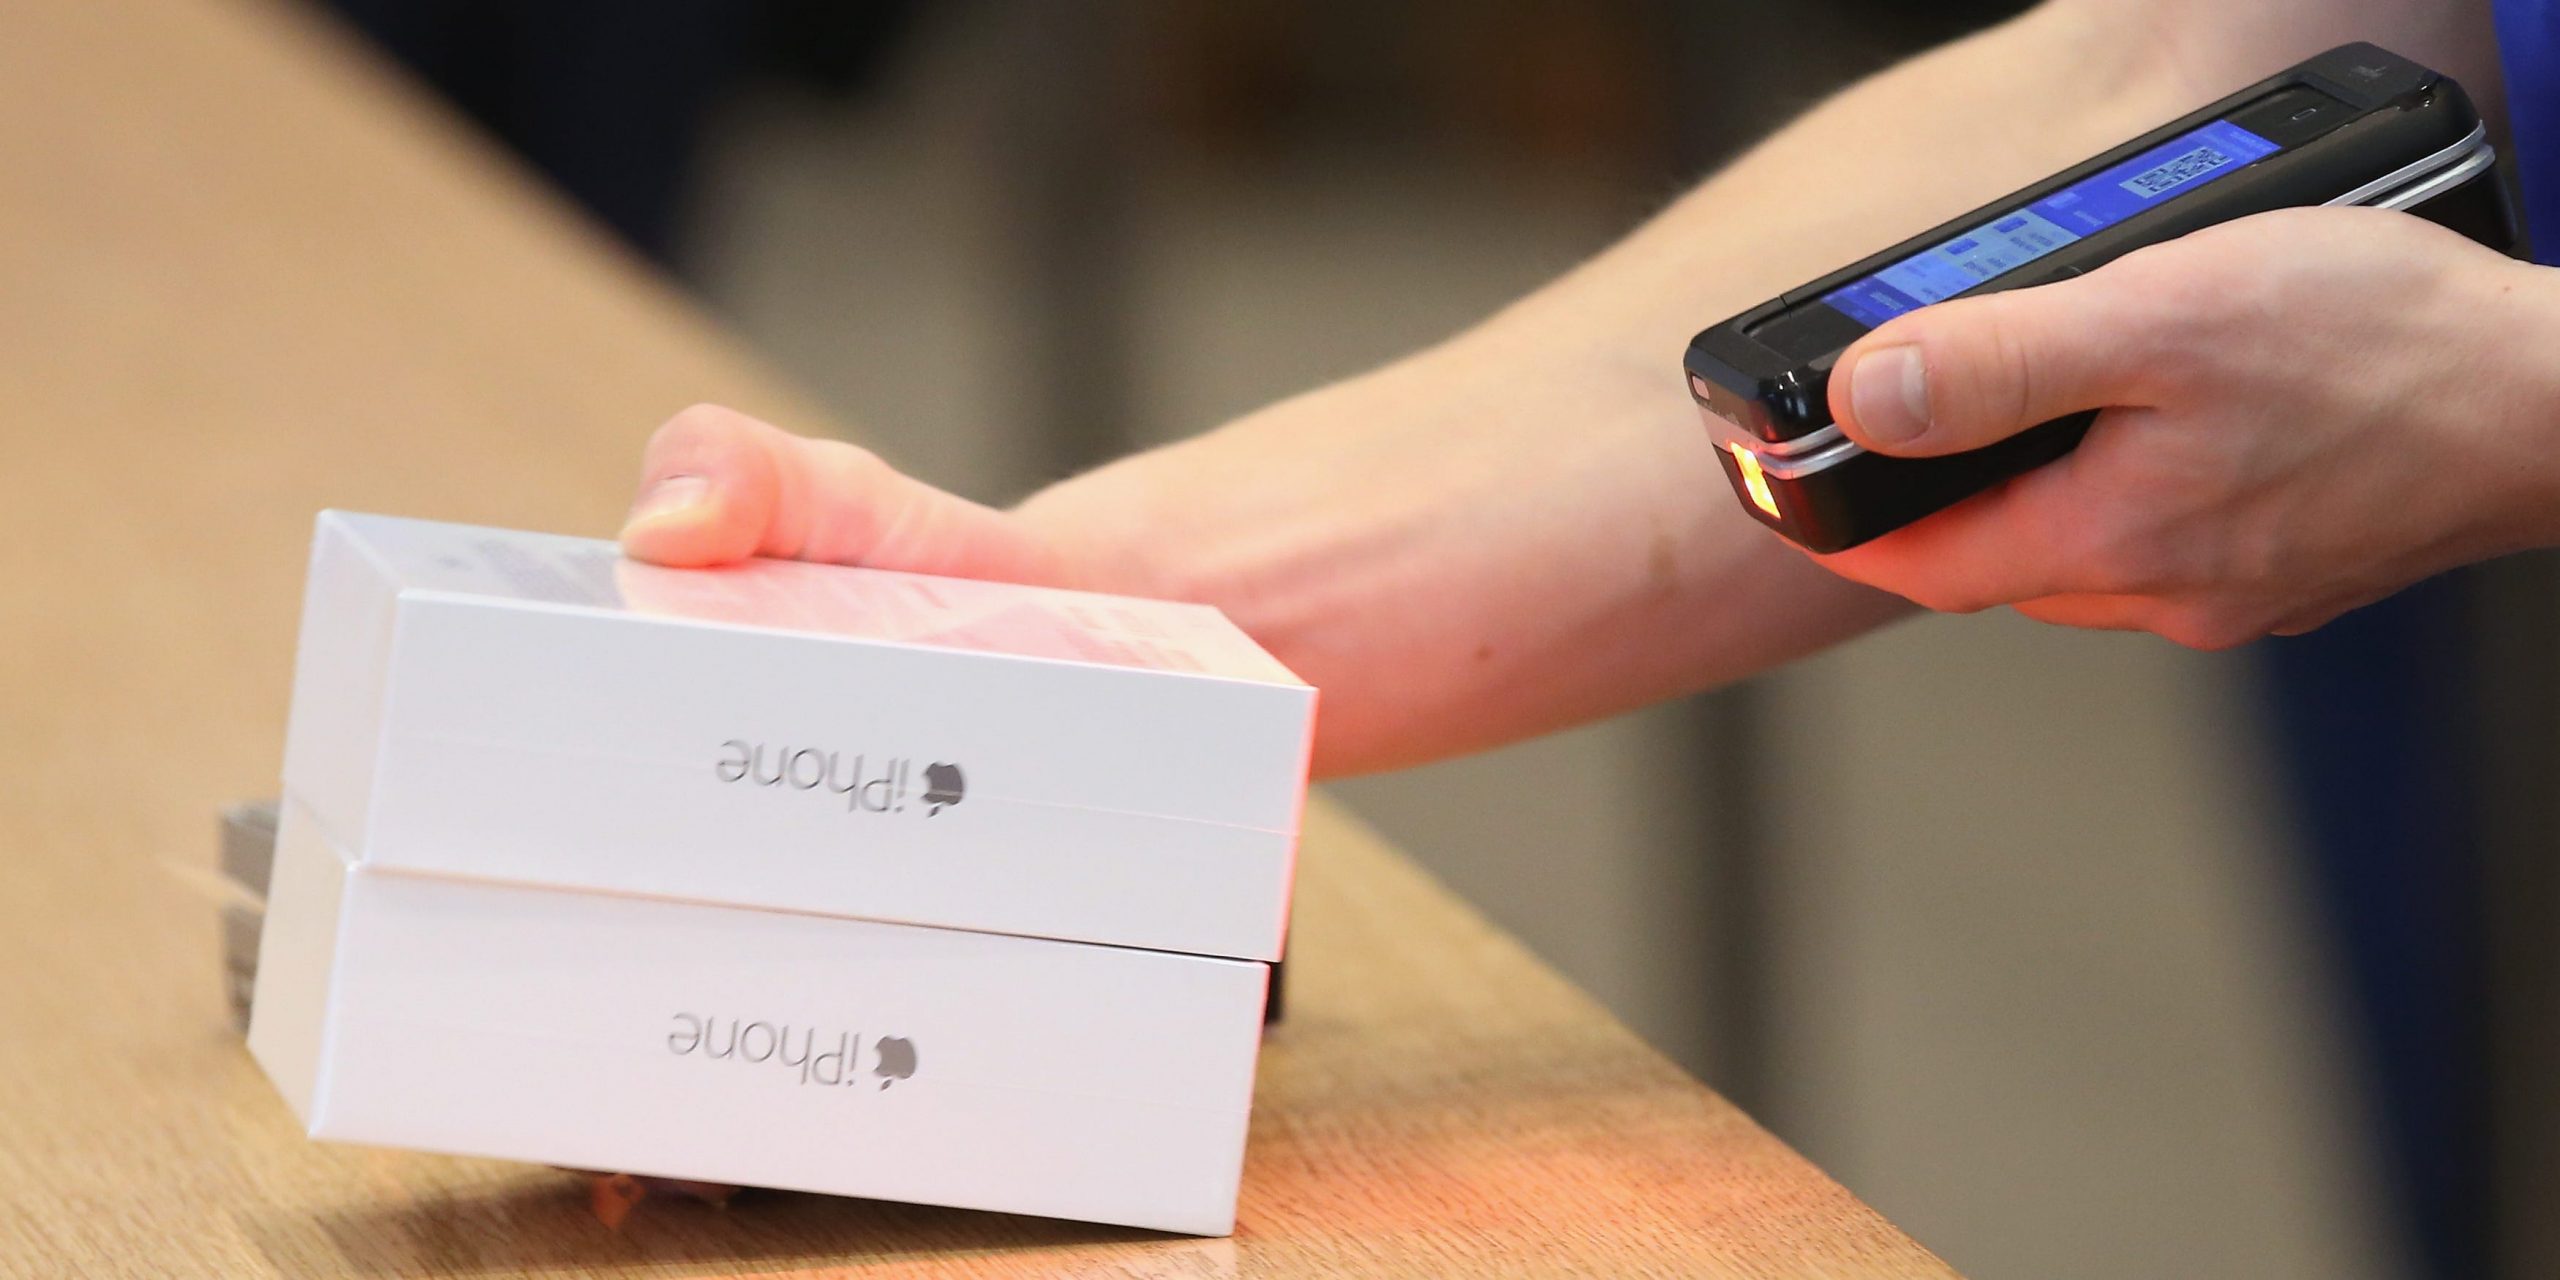 Close up of an Apple Store employee's hands holding two new iPhone boxes and scanning them with a special handheld sales device.